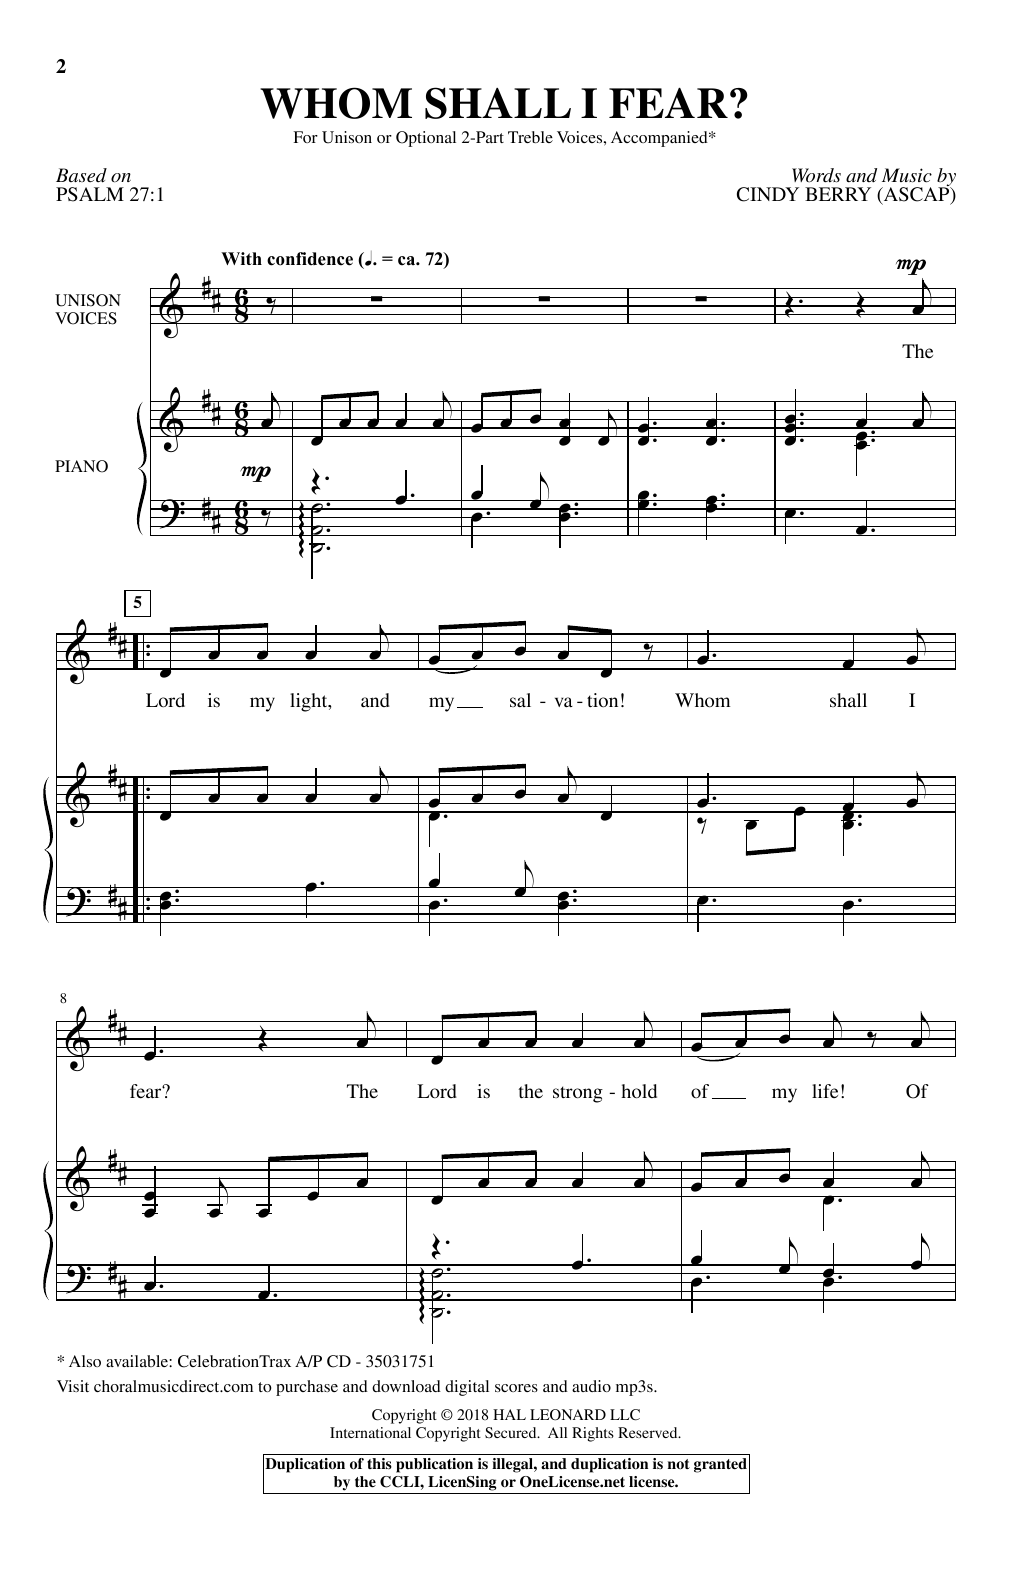 Download Cindy Berry Whom Shall I Fear? Sheet Music